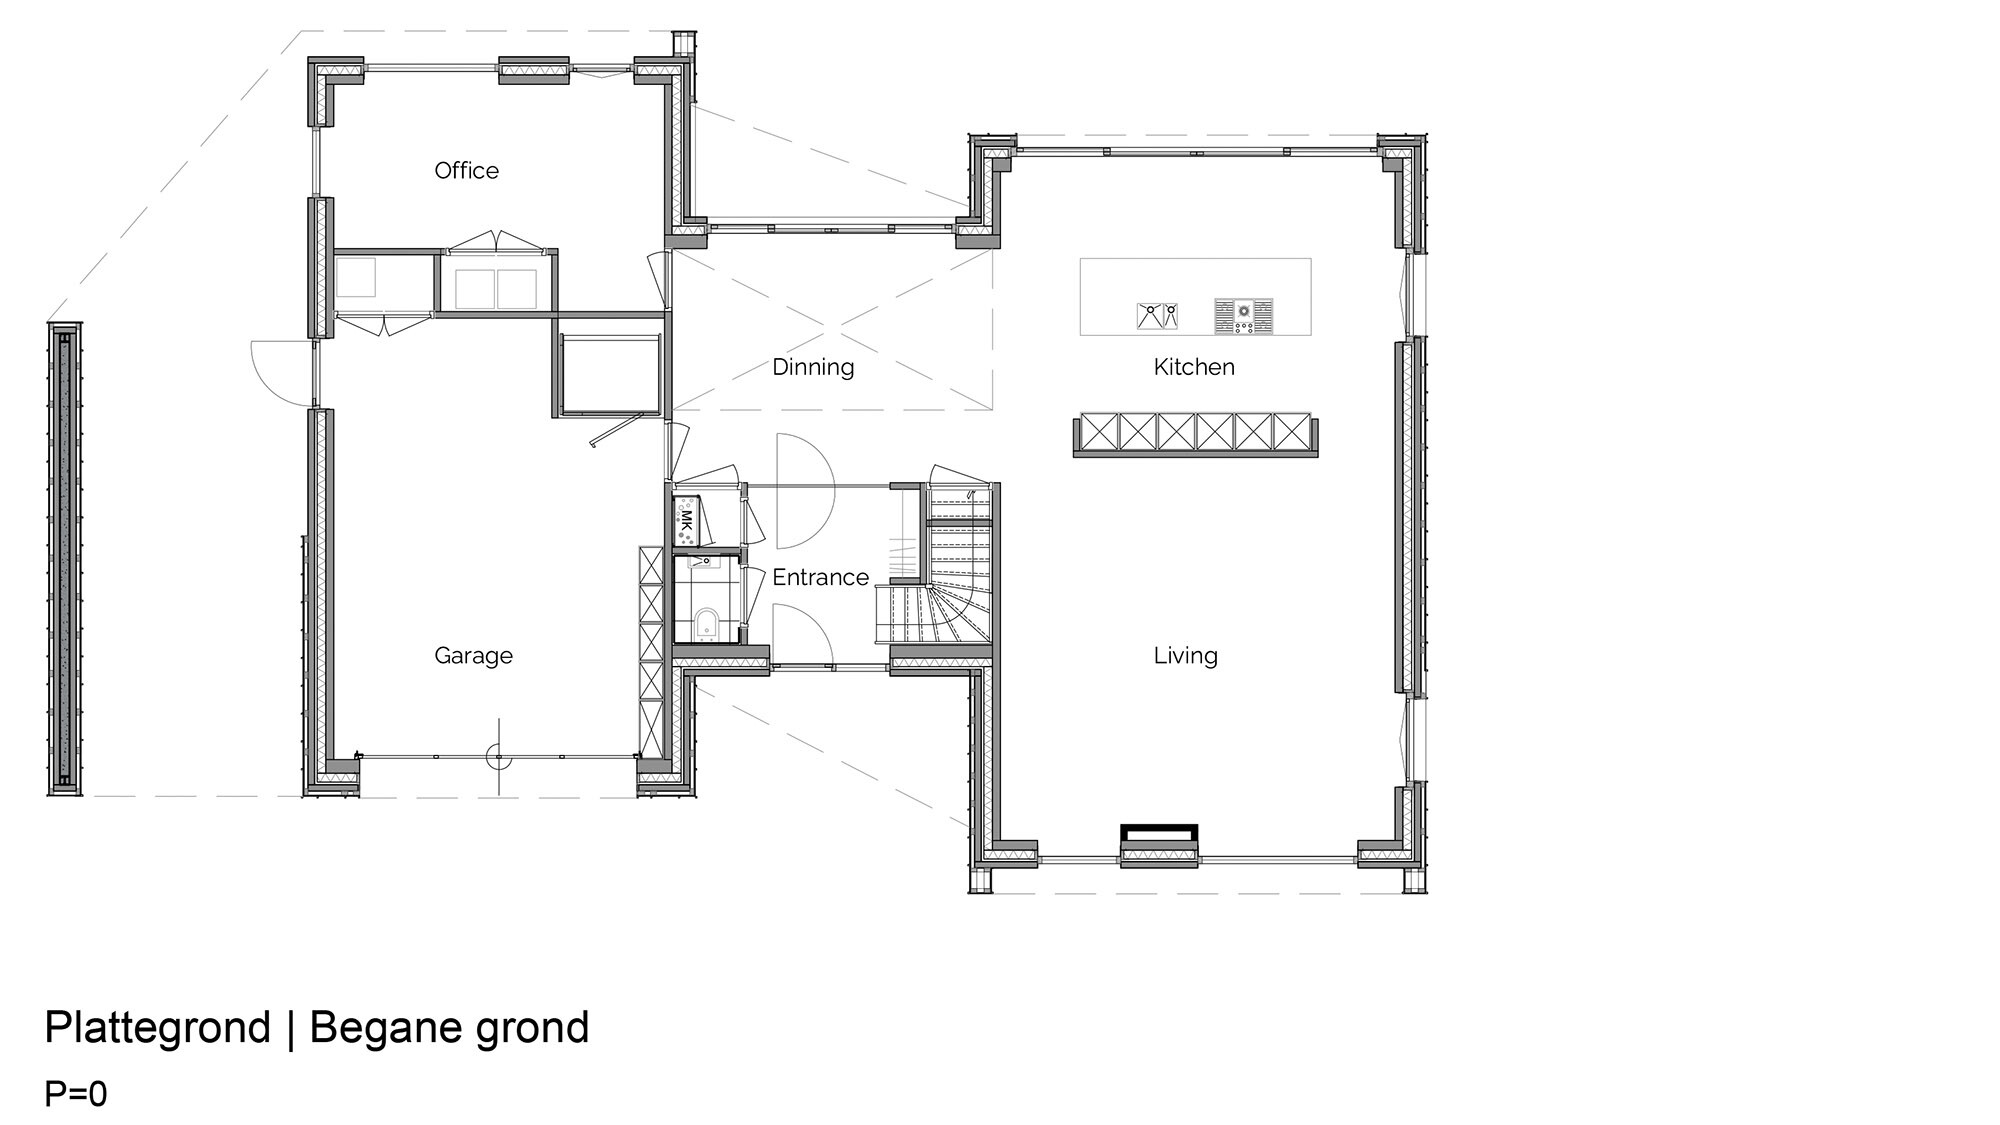 Architectural floor plan of the ground floor level of a detached house. The plan shows an entrance area leading to an office, a garage and a dining area. The kitchen is located in the centre, adjacent to a spacious living area. The rooms are clearly defined and labelled, and the drawing is detailed and precise.